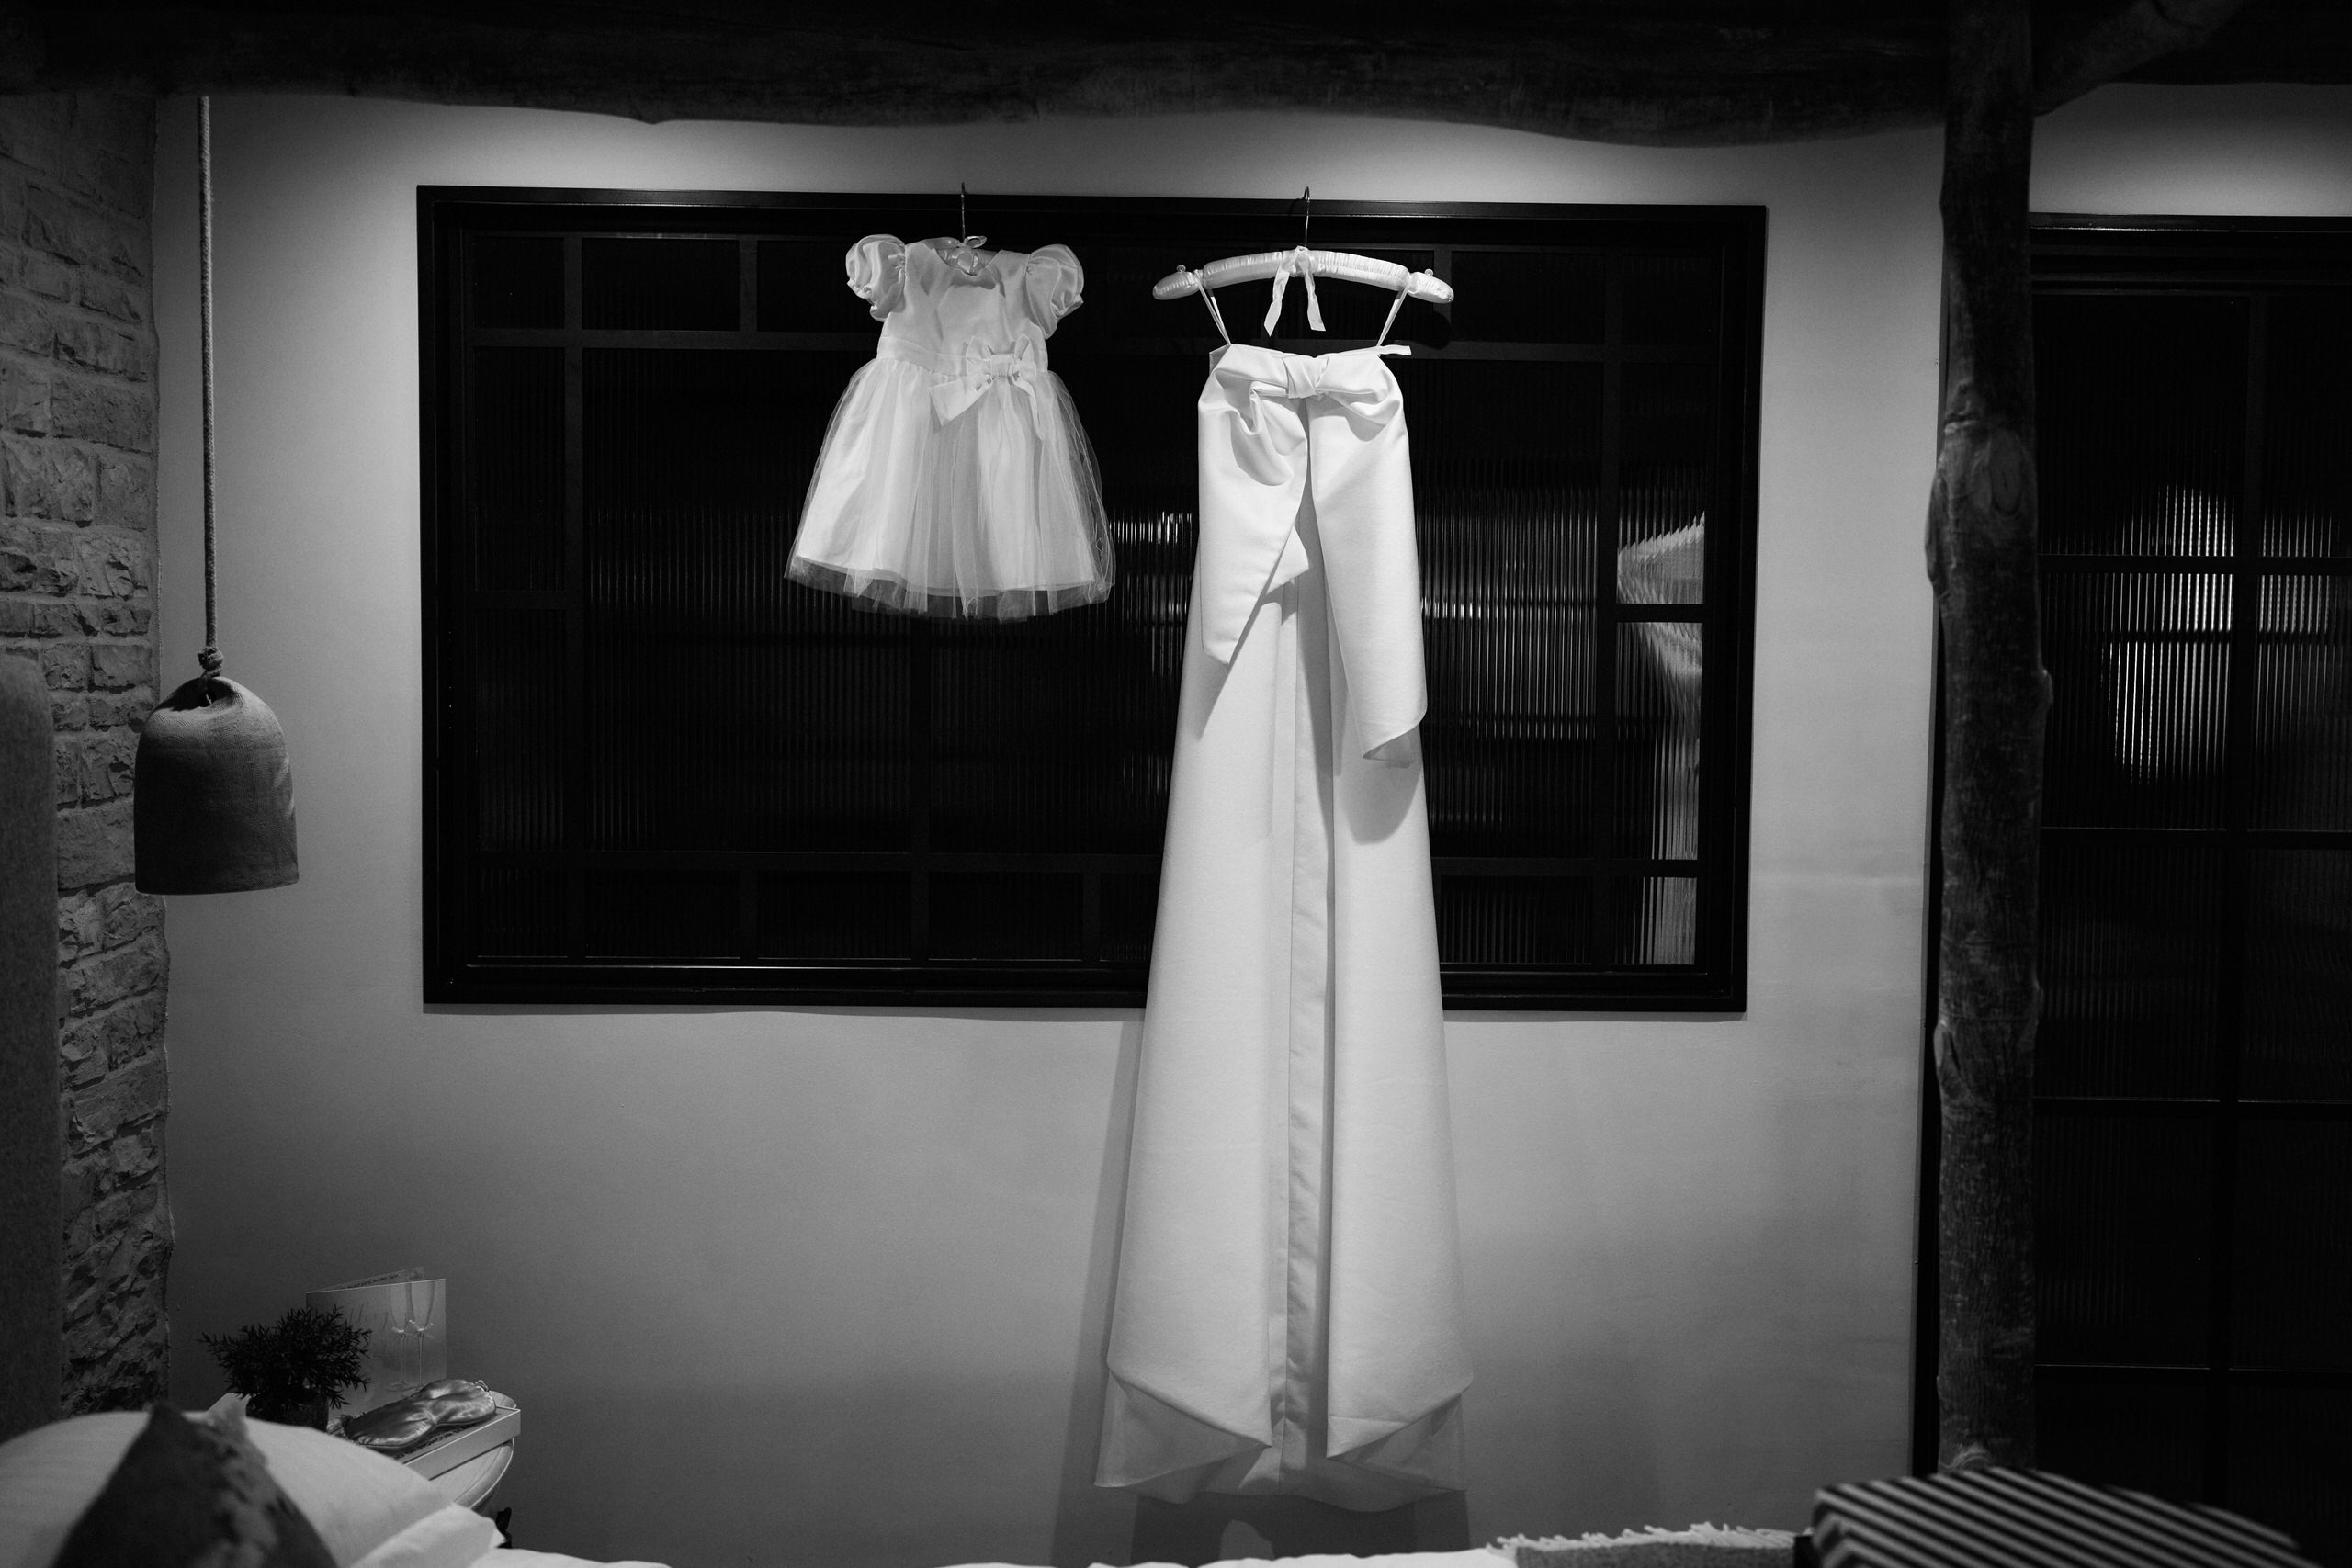 A wedding dress is hanging in a window in a black and white picture.